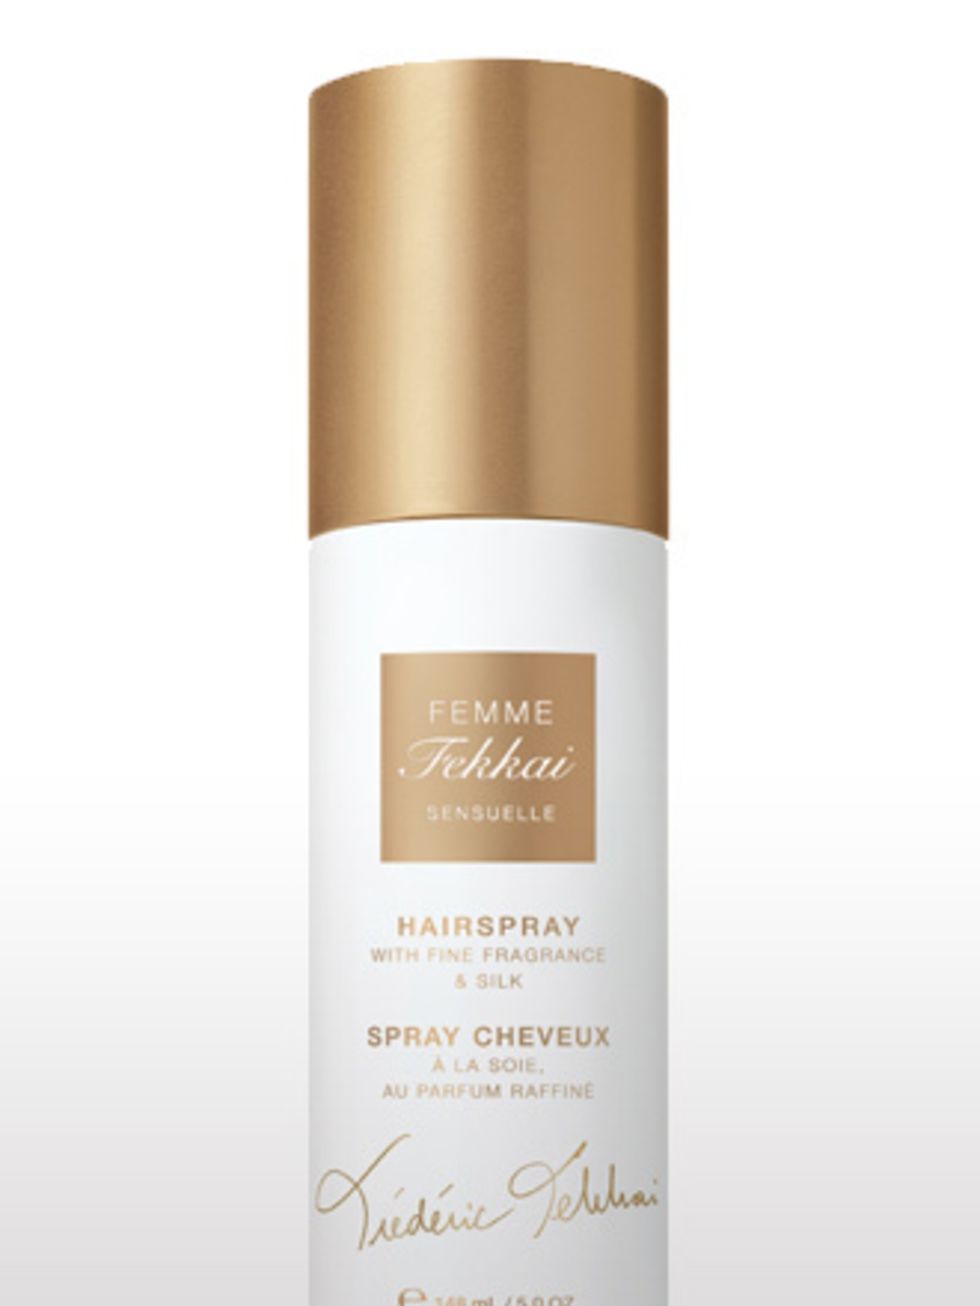 <p>Frederic has gone all fragranced on us. Not satisfied with having one of the best haircare lines out there, he has launched a range of three scented haircare products and one perfume. This hairspray imparts a refreshing fragrance on your locks (ideal i